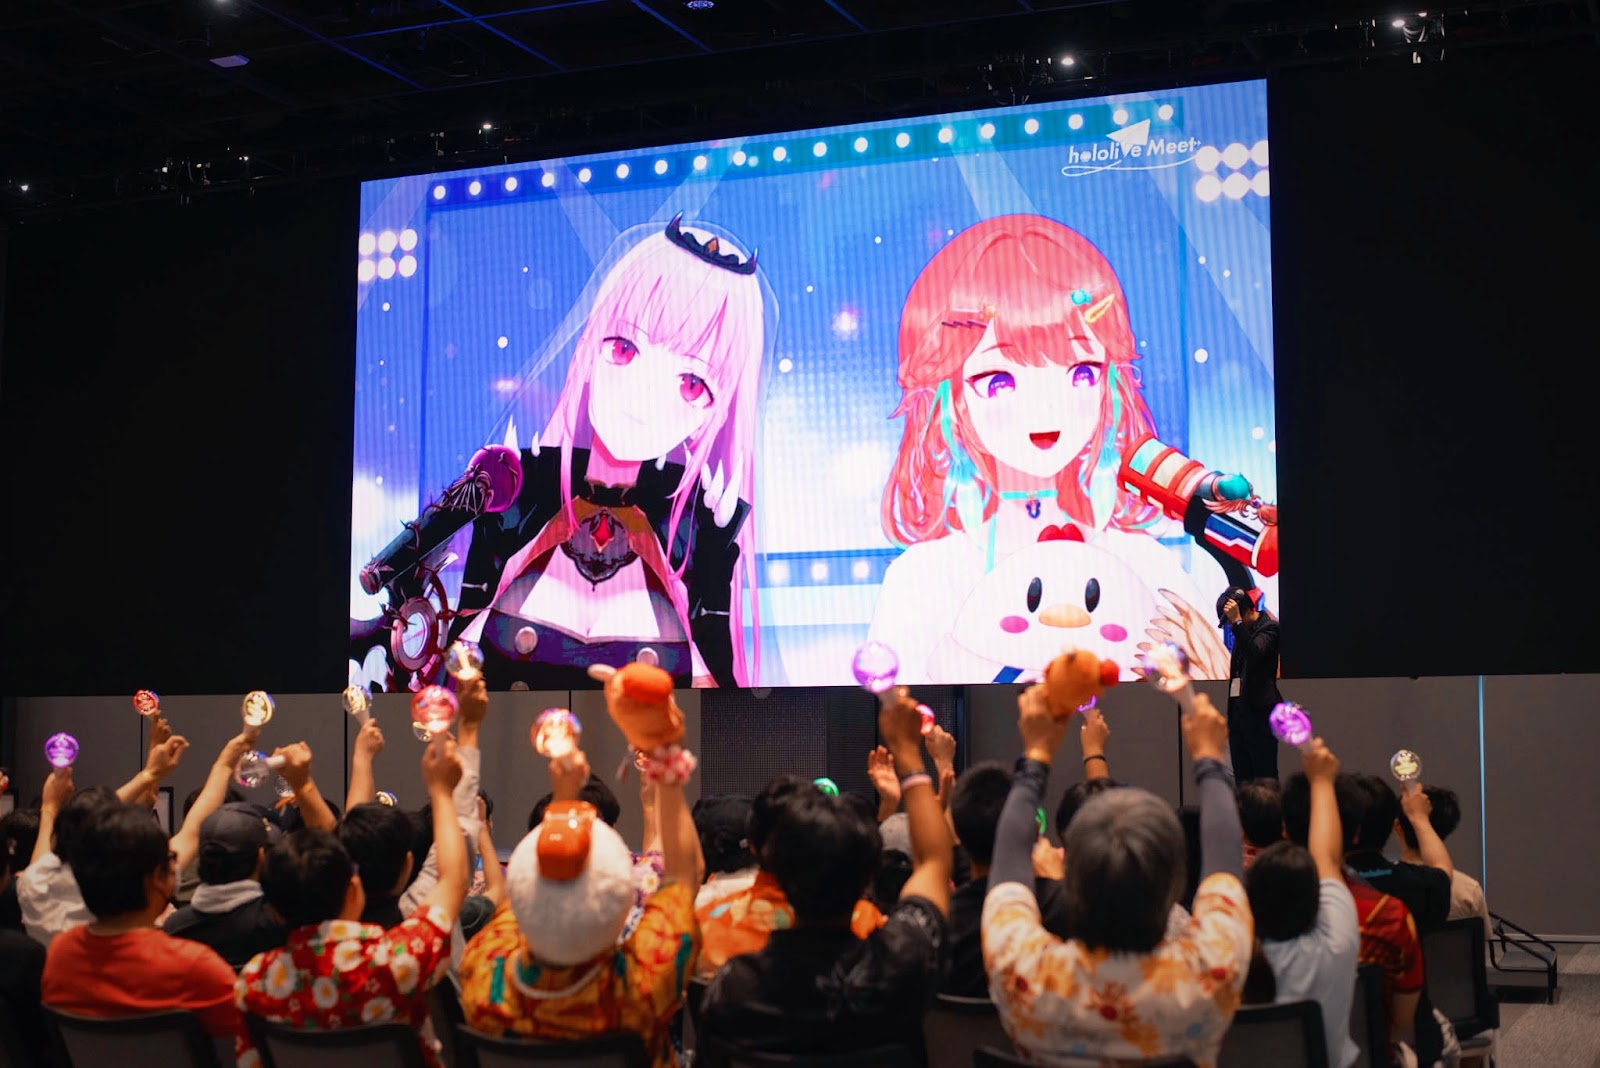 Mori Calliope and Takanashi Kiara's hololive Meet in Thailand received high praise from fans. Check out the event highlights!